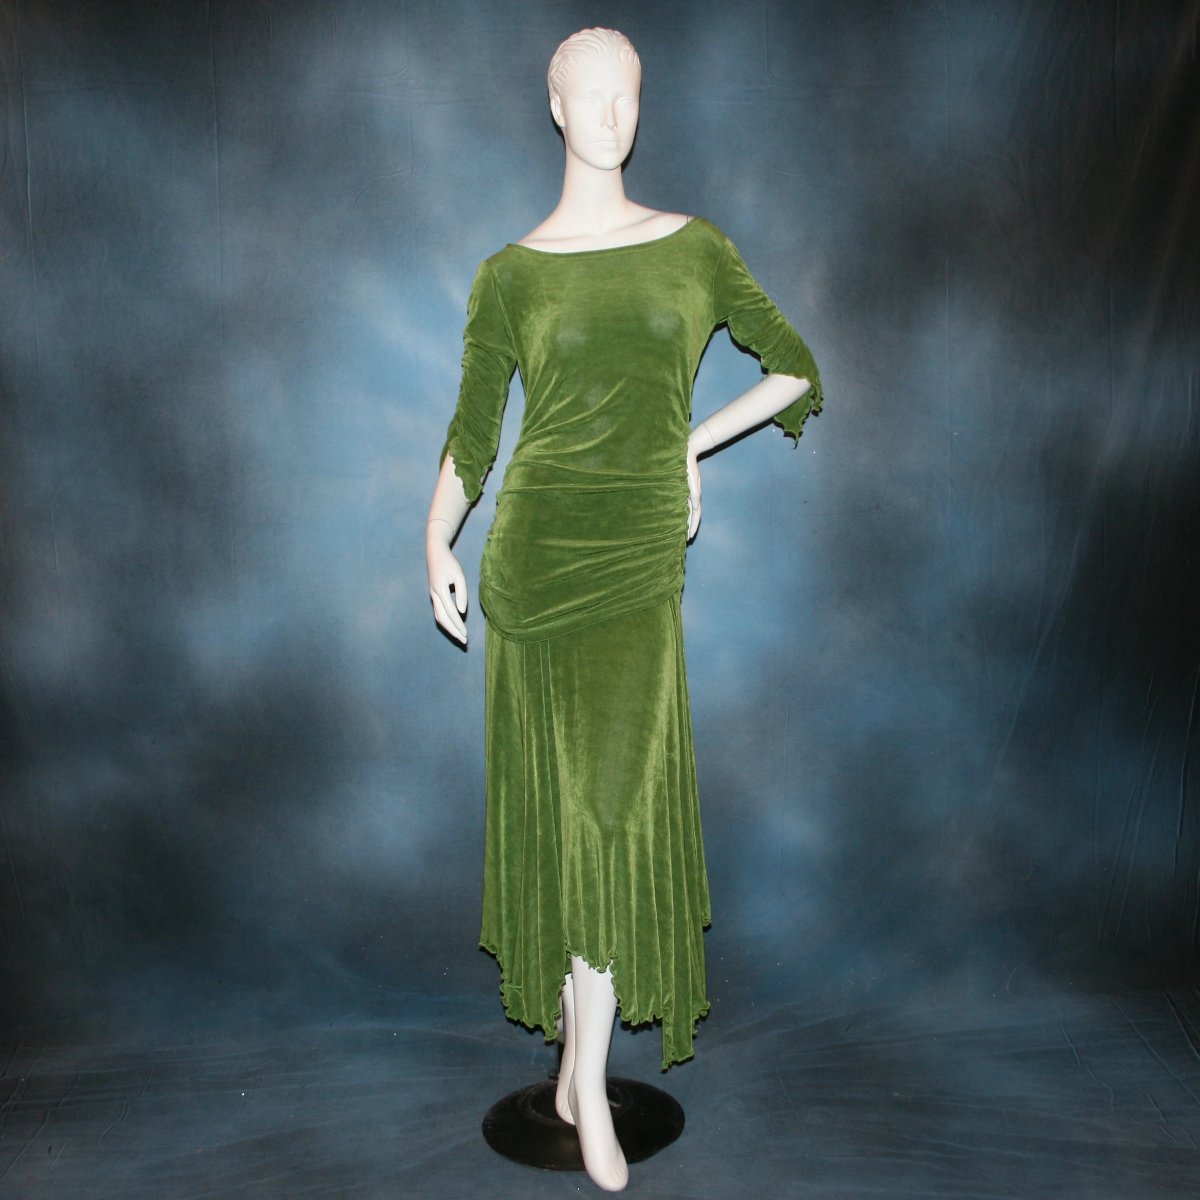 Ruched top with ruched 3/4 sleeves with a slight flaired detail includes trumpet flaired ballroom dance skirt with peaks created of luxurious olive green solid slinky fabric, & can be custom created in many colors. Great for ballroom dance teachers!